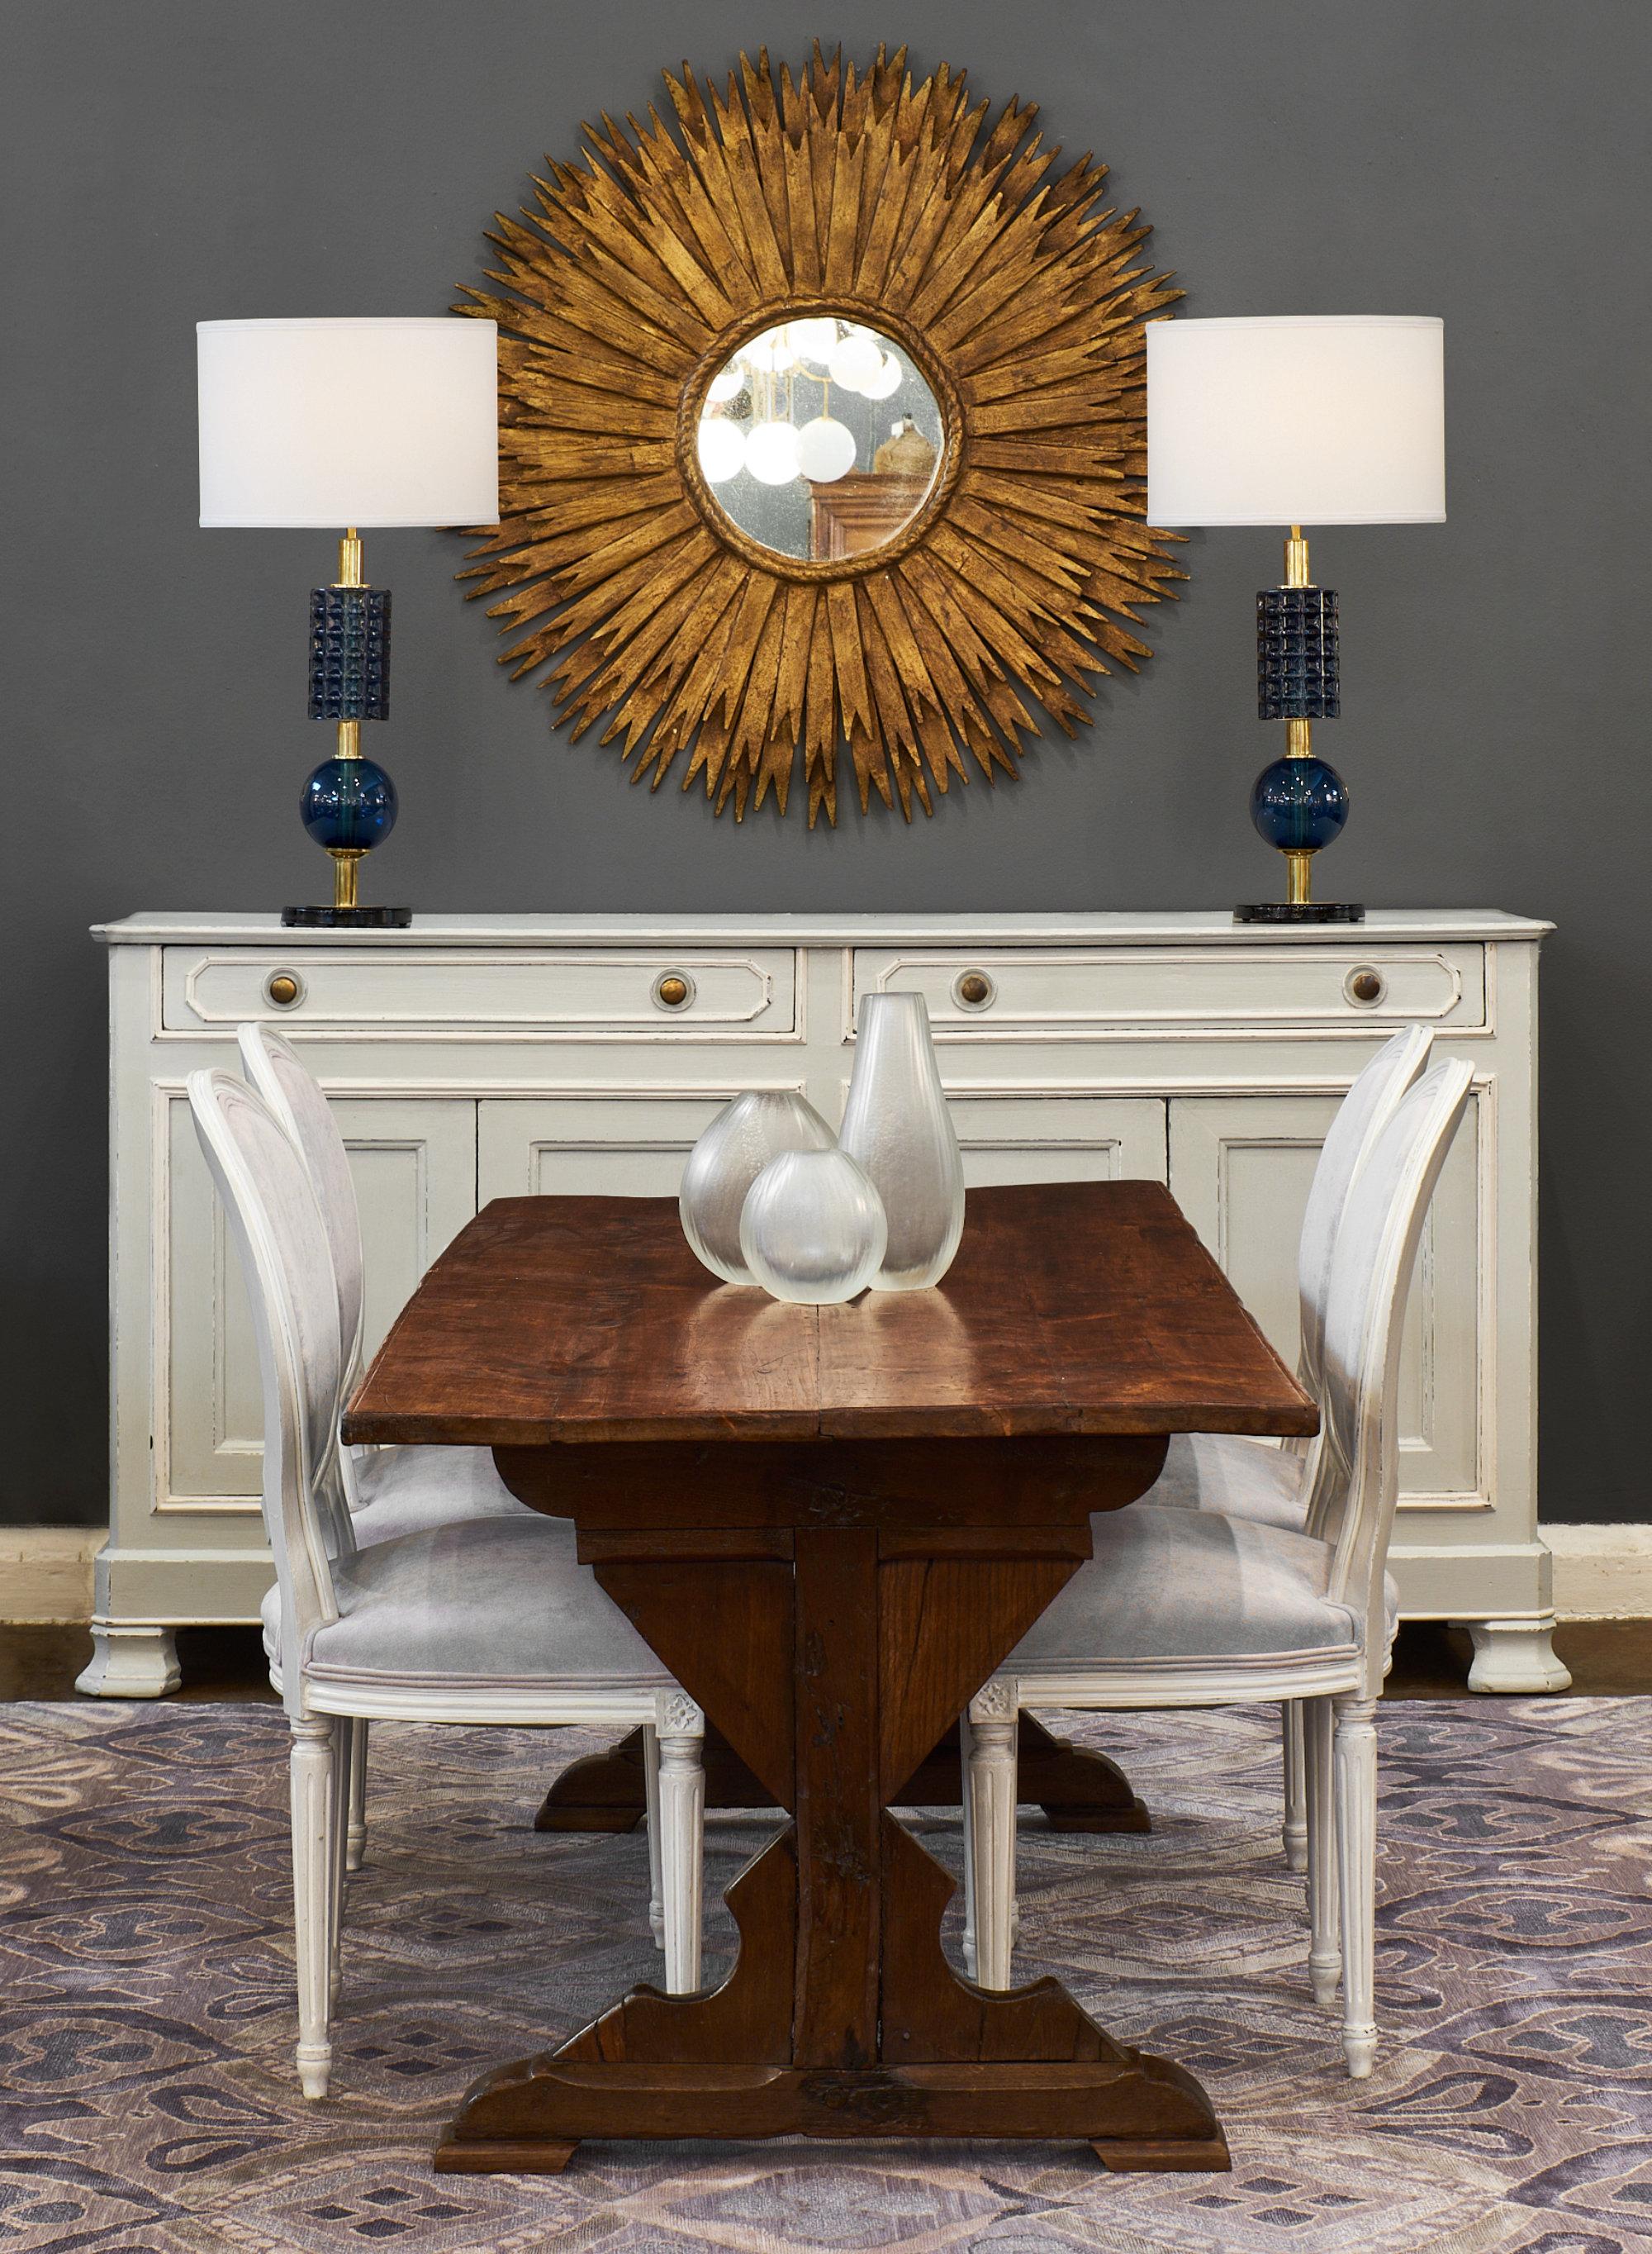 Pair of Spanish sunburst mirrors made of gold-leafed wood. We love the large size and classic aesthetic of this pair.